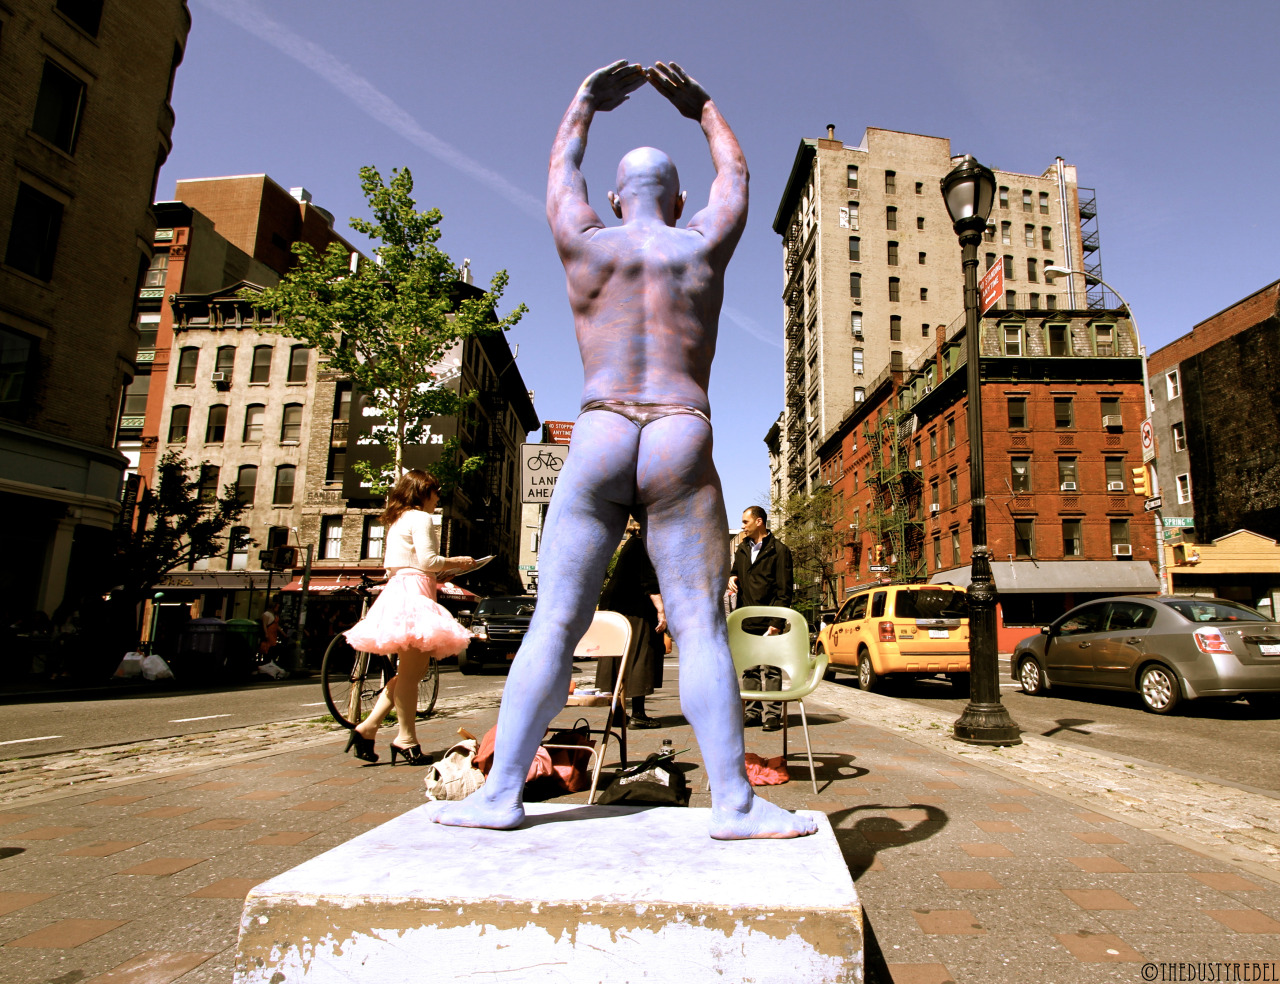 Take Back The Park For Art The performance art demonstration against the Citi Bike share station in Petrosino Square continued again today. The share station takes up a large section of the park which once hosted public art installations.
More from...